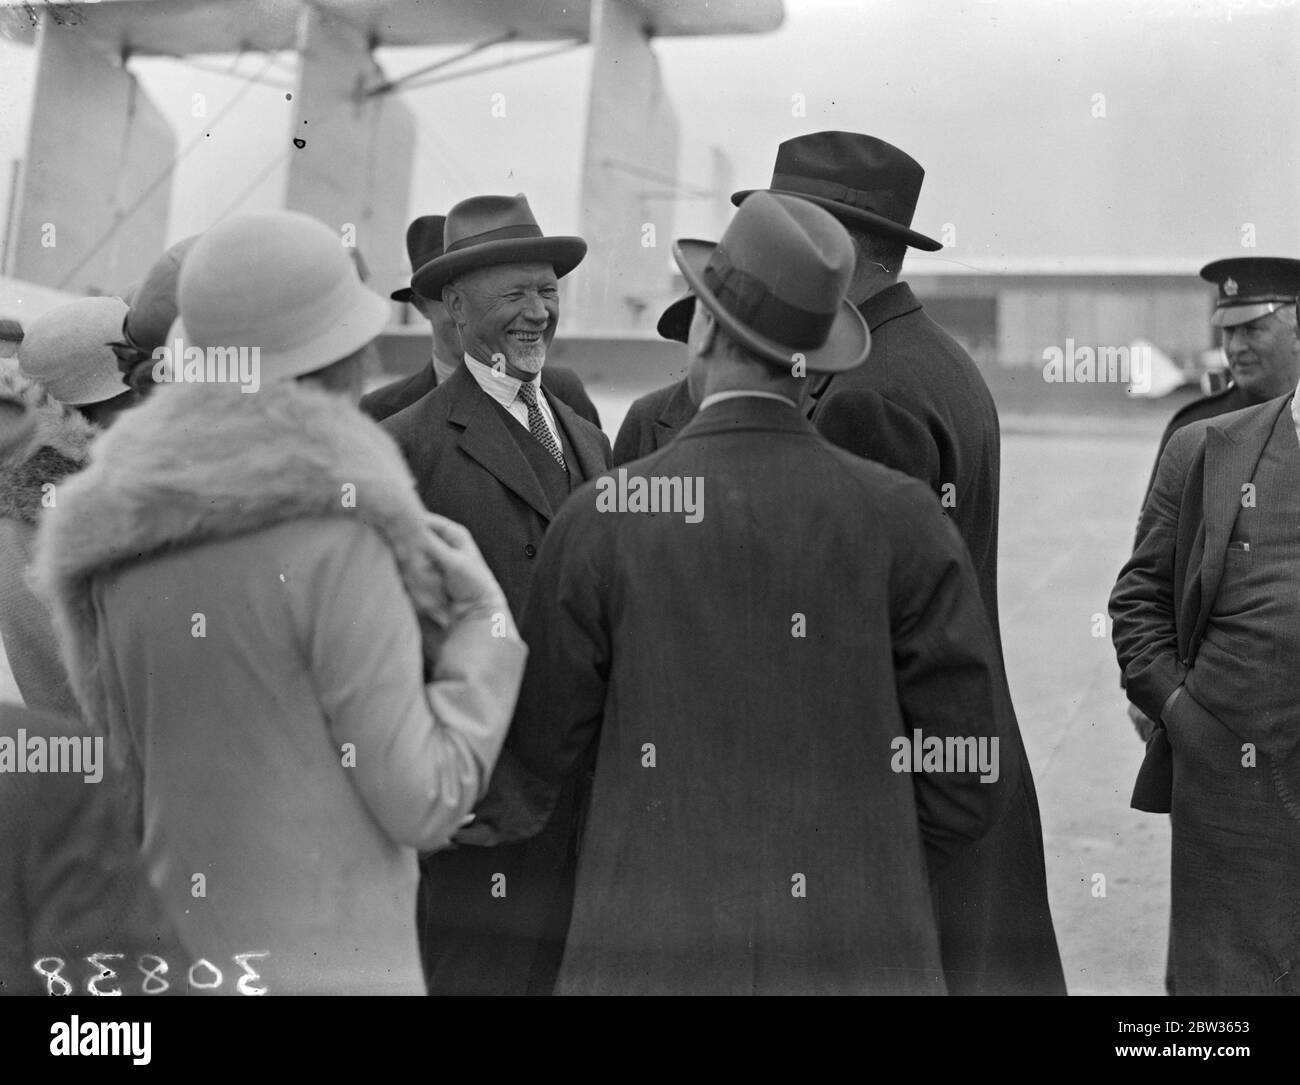 General Smuts arrives by air for World Economic Conference . General Smuts , the leader of the South African delegation to the World Economic Conference , arrived at Croydon Aerodrome having flown the entire jouney from Cape Town . Photo shows ; General Smuts smiling happily as he was greeted on arrival at Croydon Aerodrome . 11 June 1933 Stock Photo